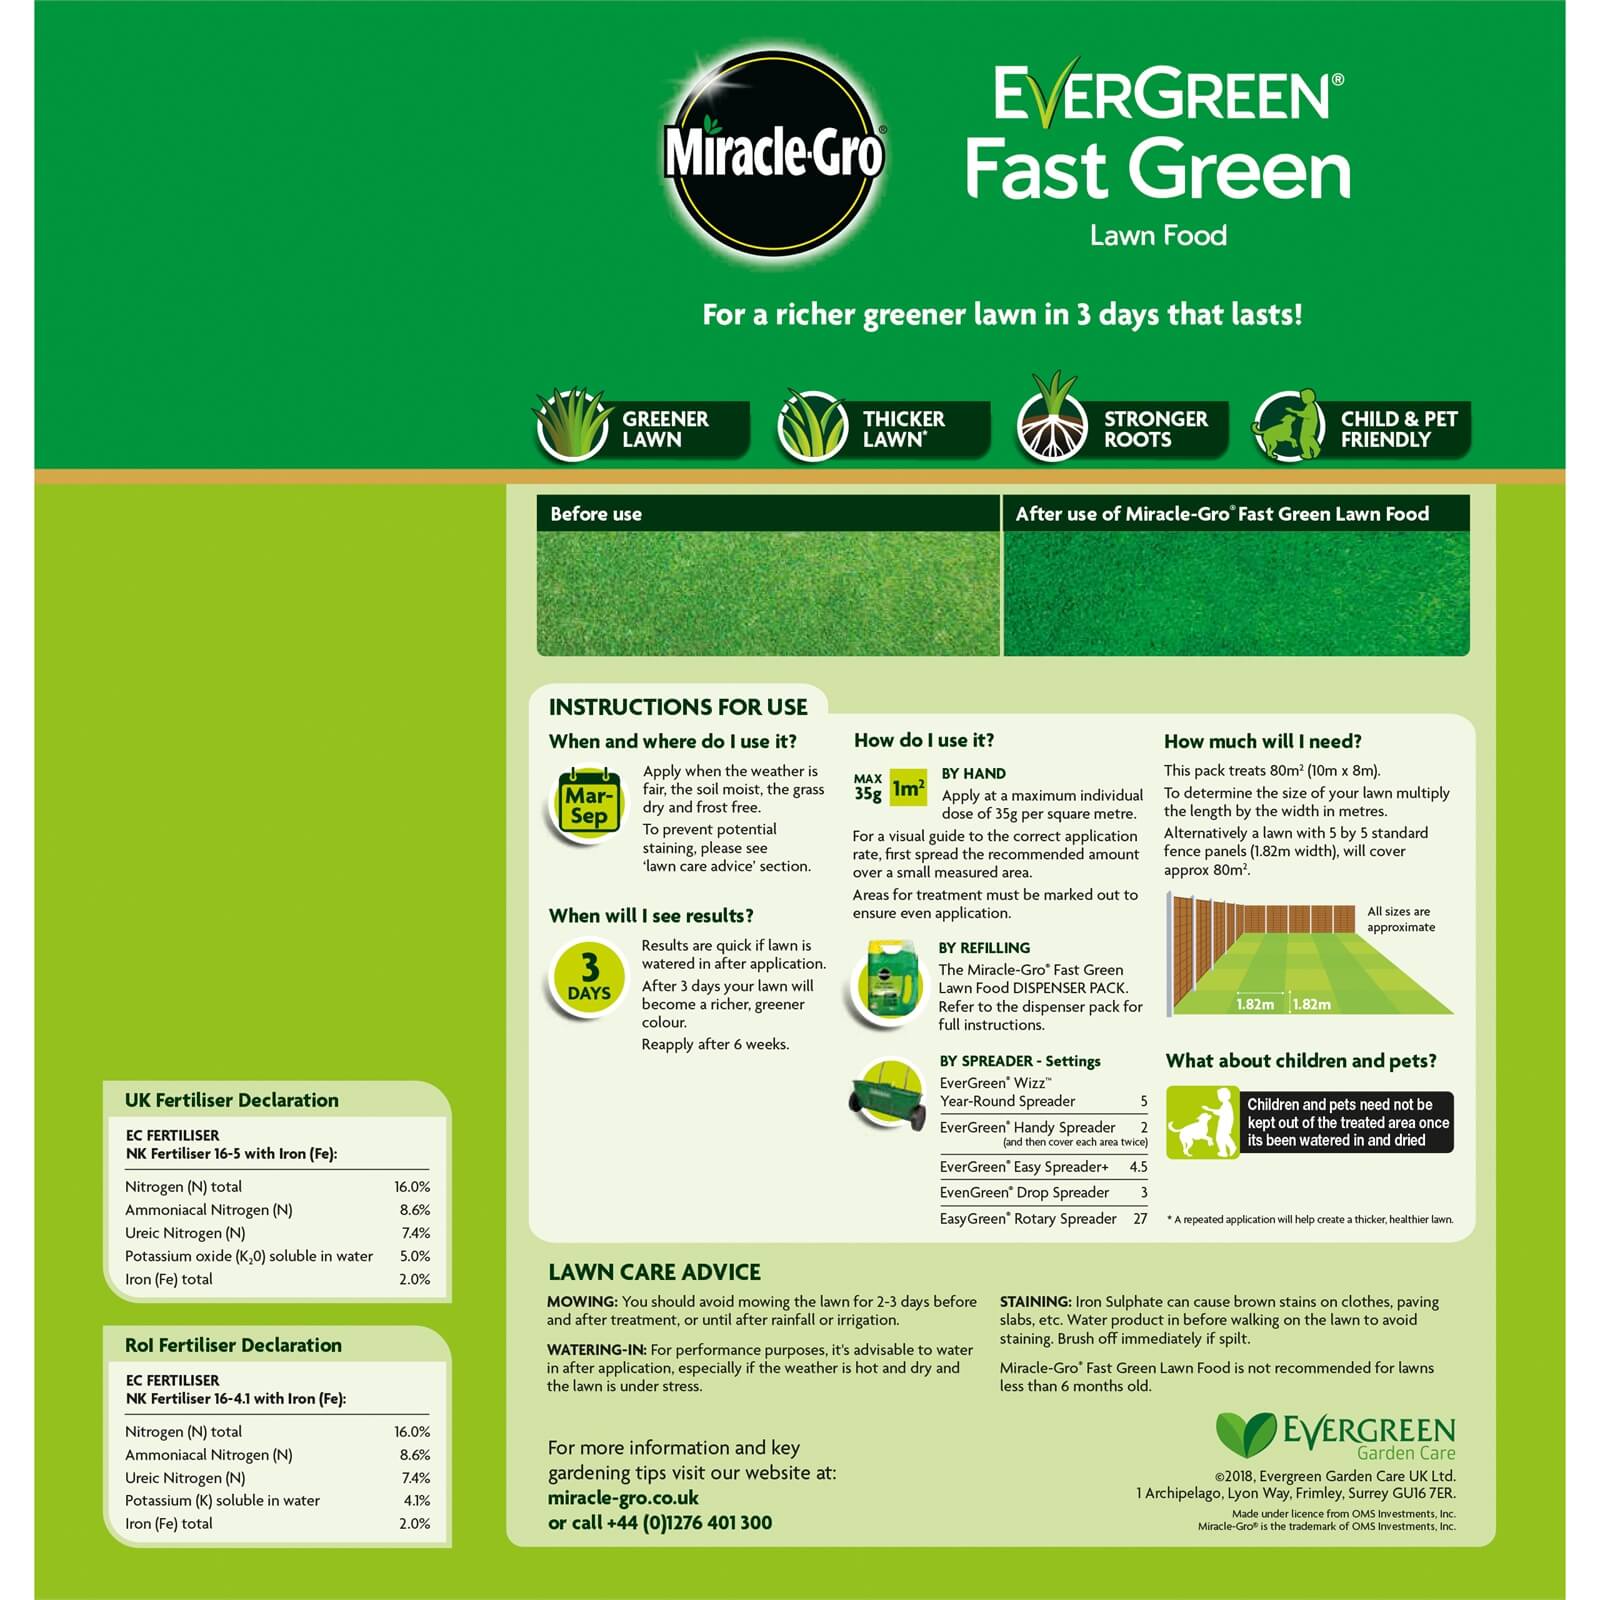 Miracle-Gro Evergreen Fast Green Lawn Food - 80m²